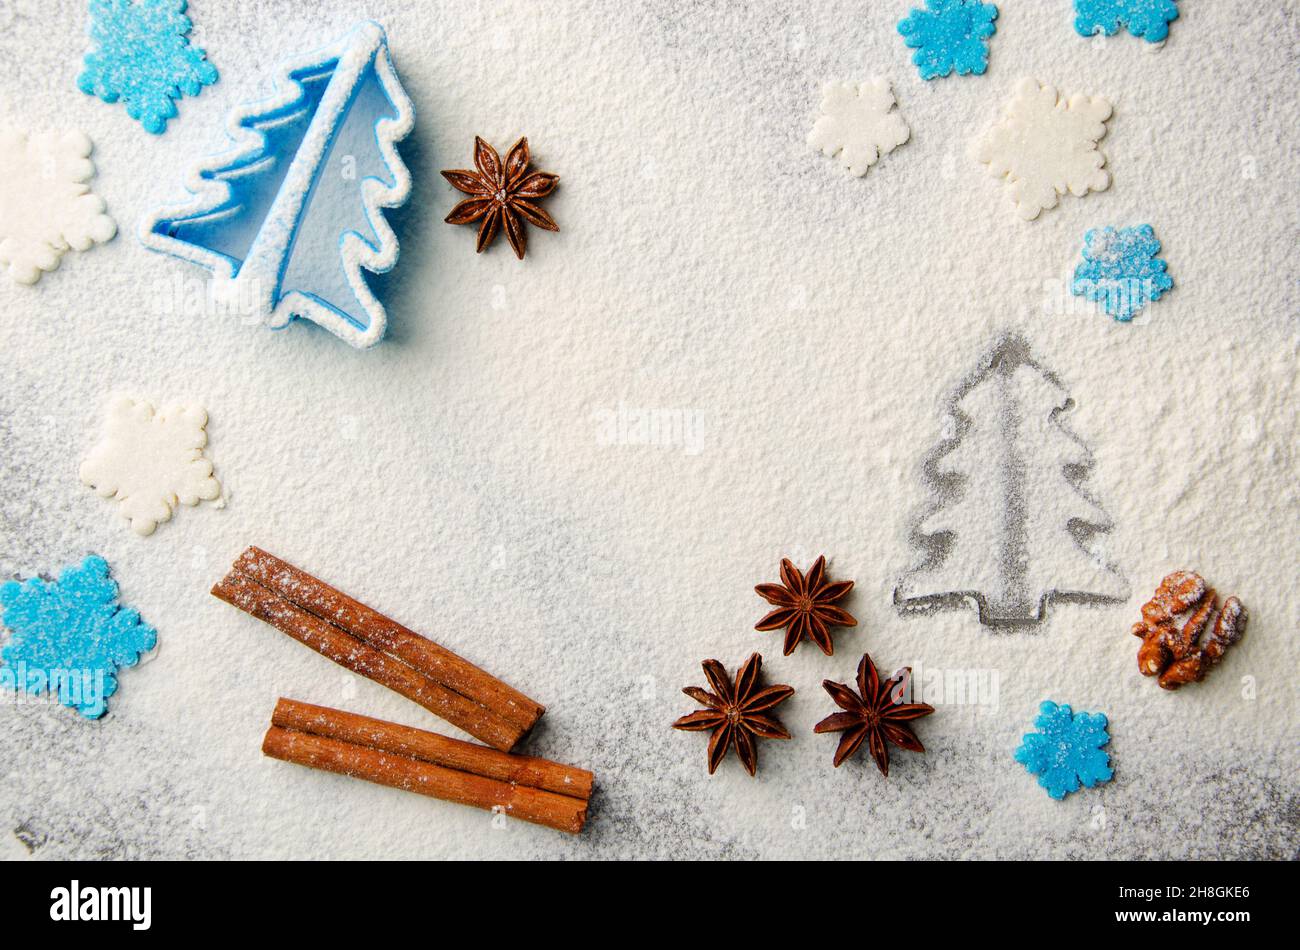 Christmas kitchen background made of flour, cinnamon sticks, anise,  cookie cutter and sugar sprinkles Stock Photo